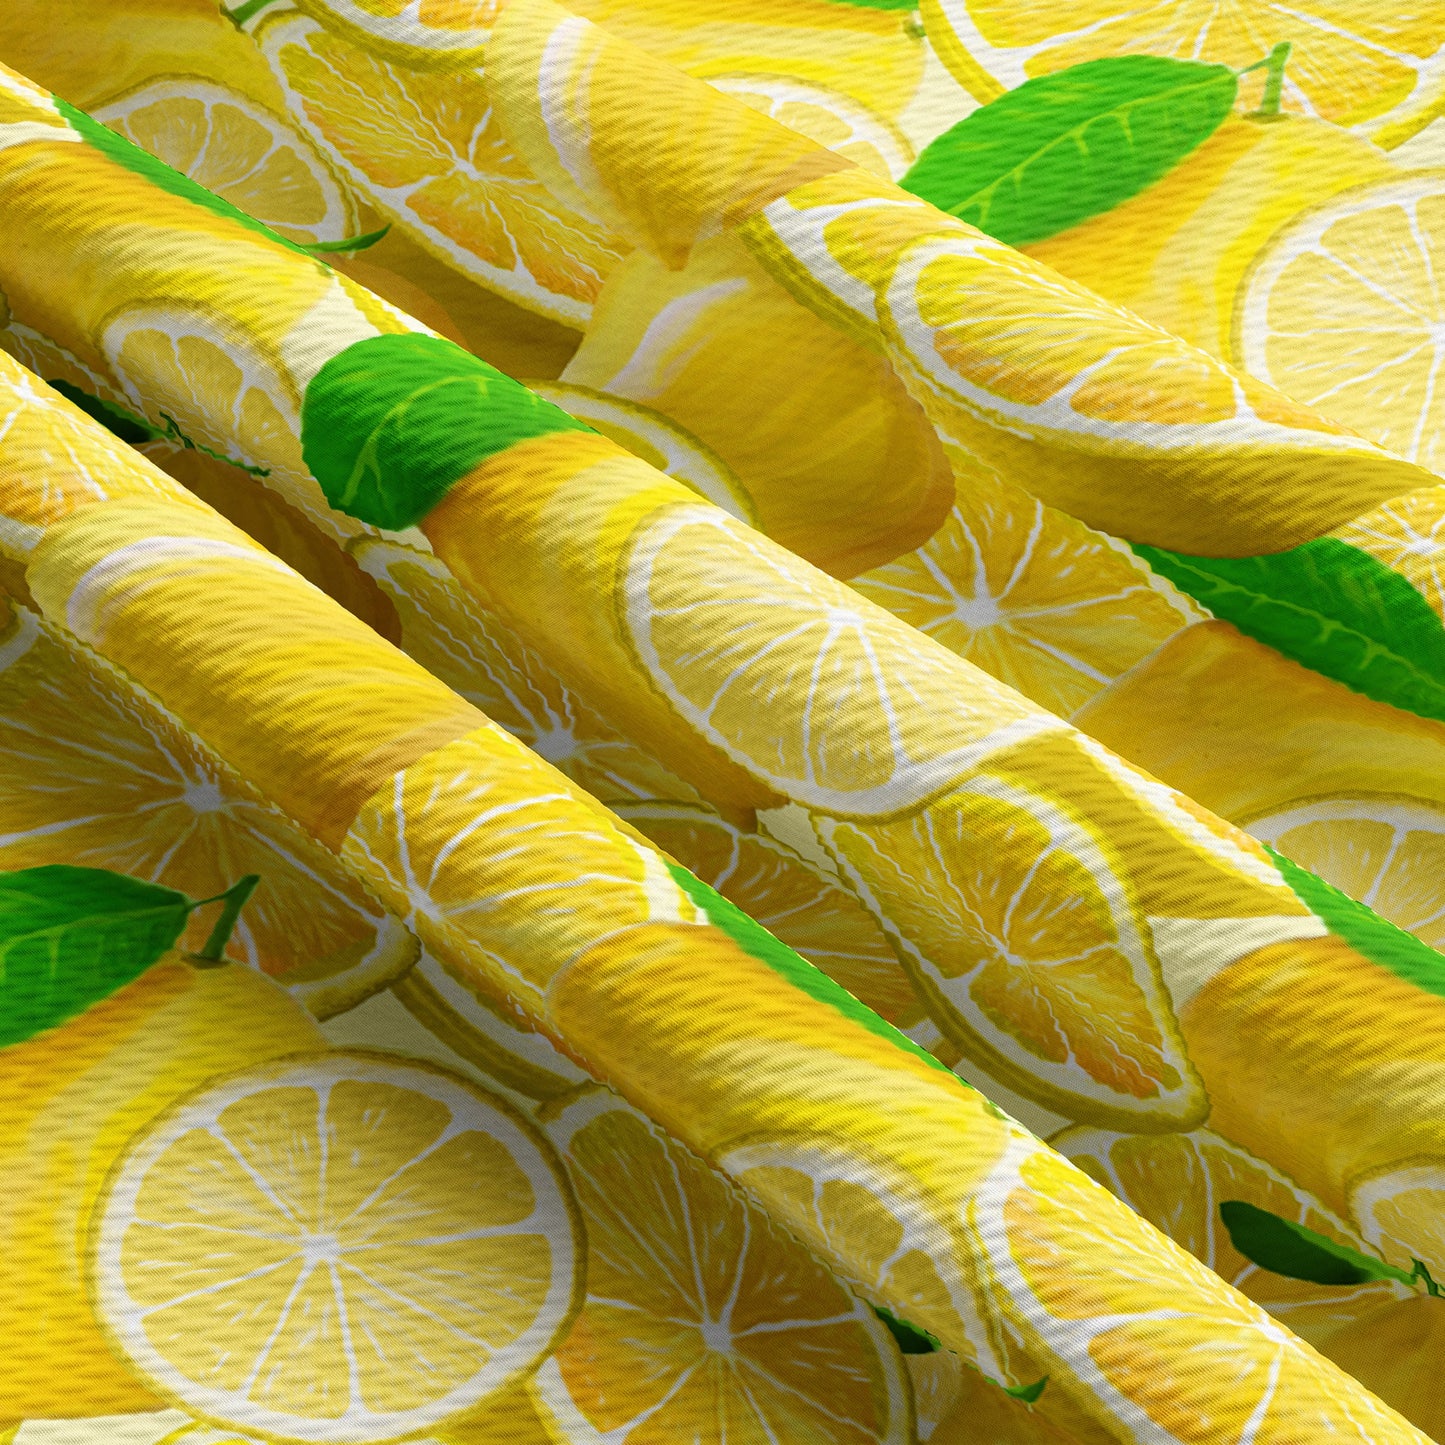 Lemon Printed Liverpool Bullet Textured Fabric by the yard 4 Way Stretch Solid Strip Thick Liverpool Fabric  (Lemon4)